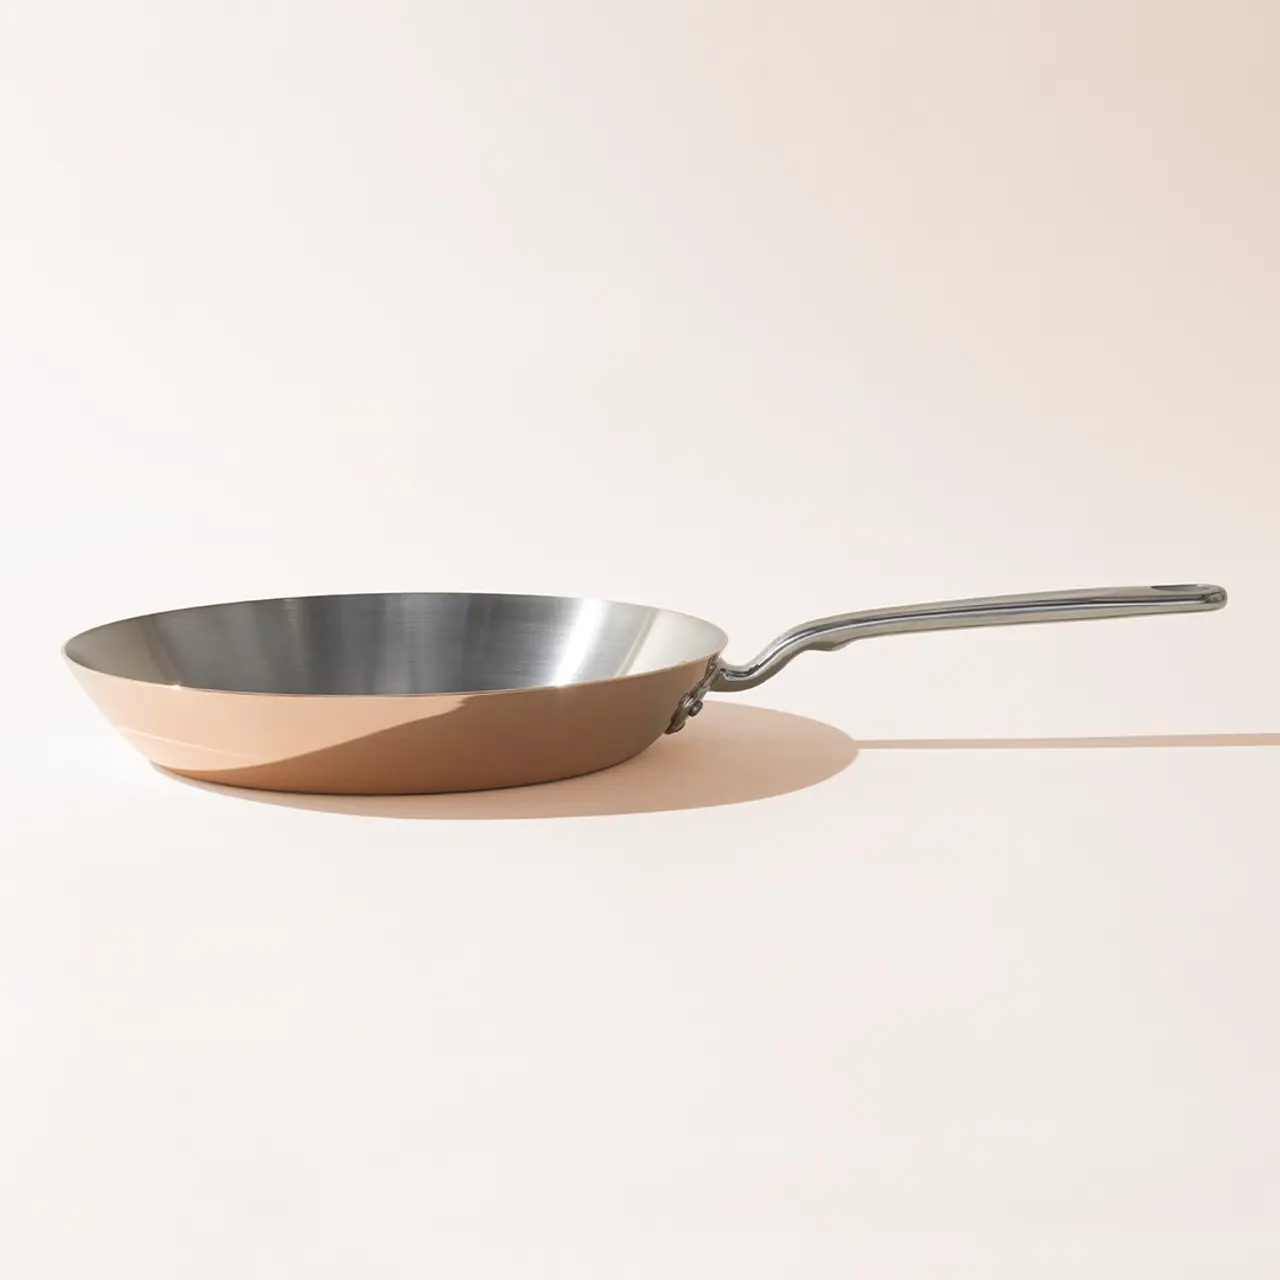 A stainless steel frying pan casts a long shadow on a light background.